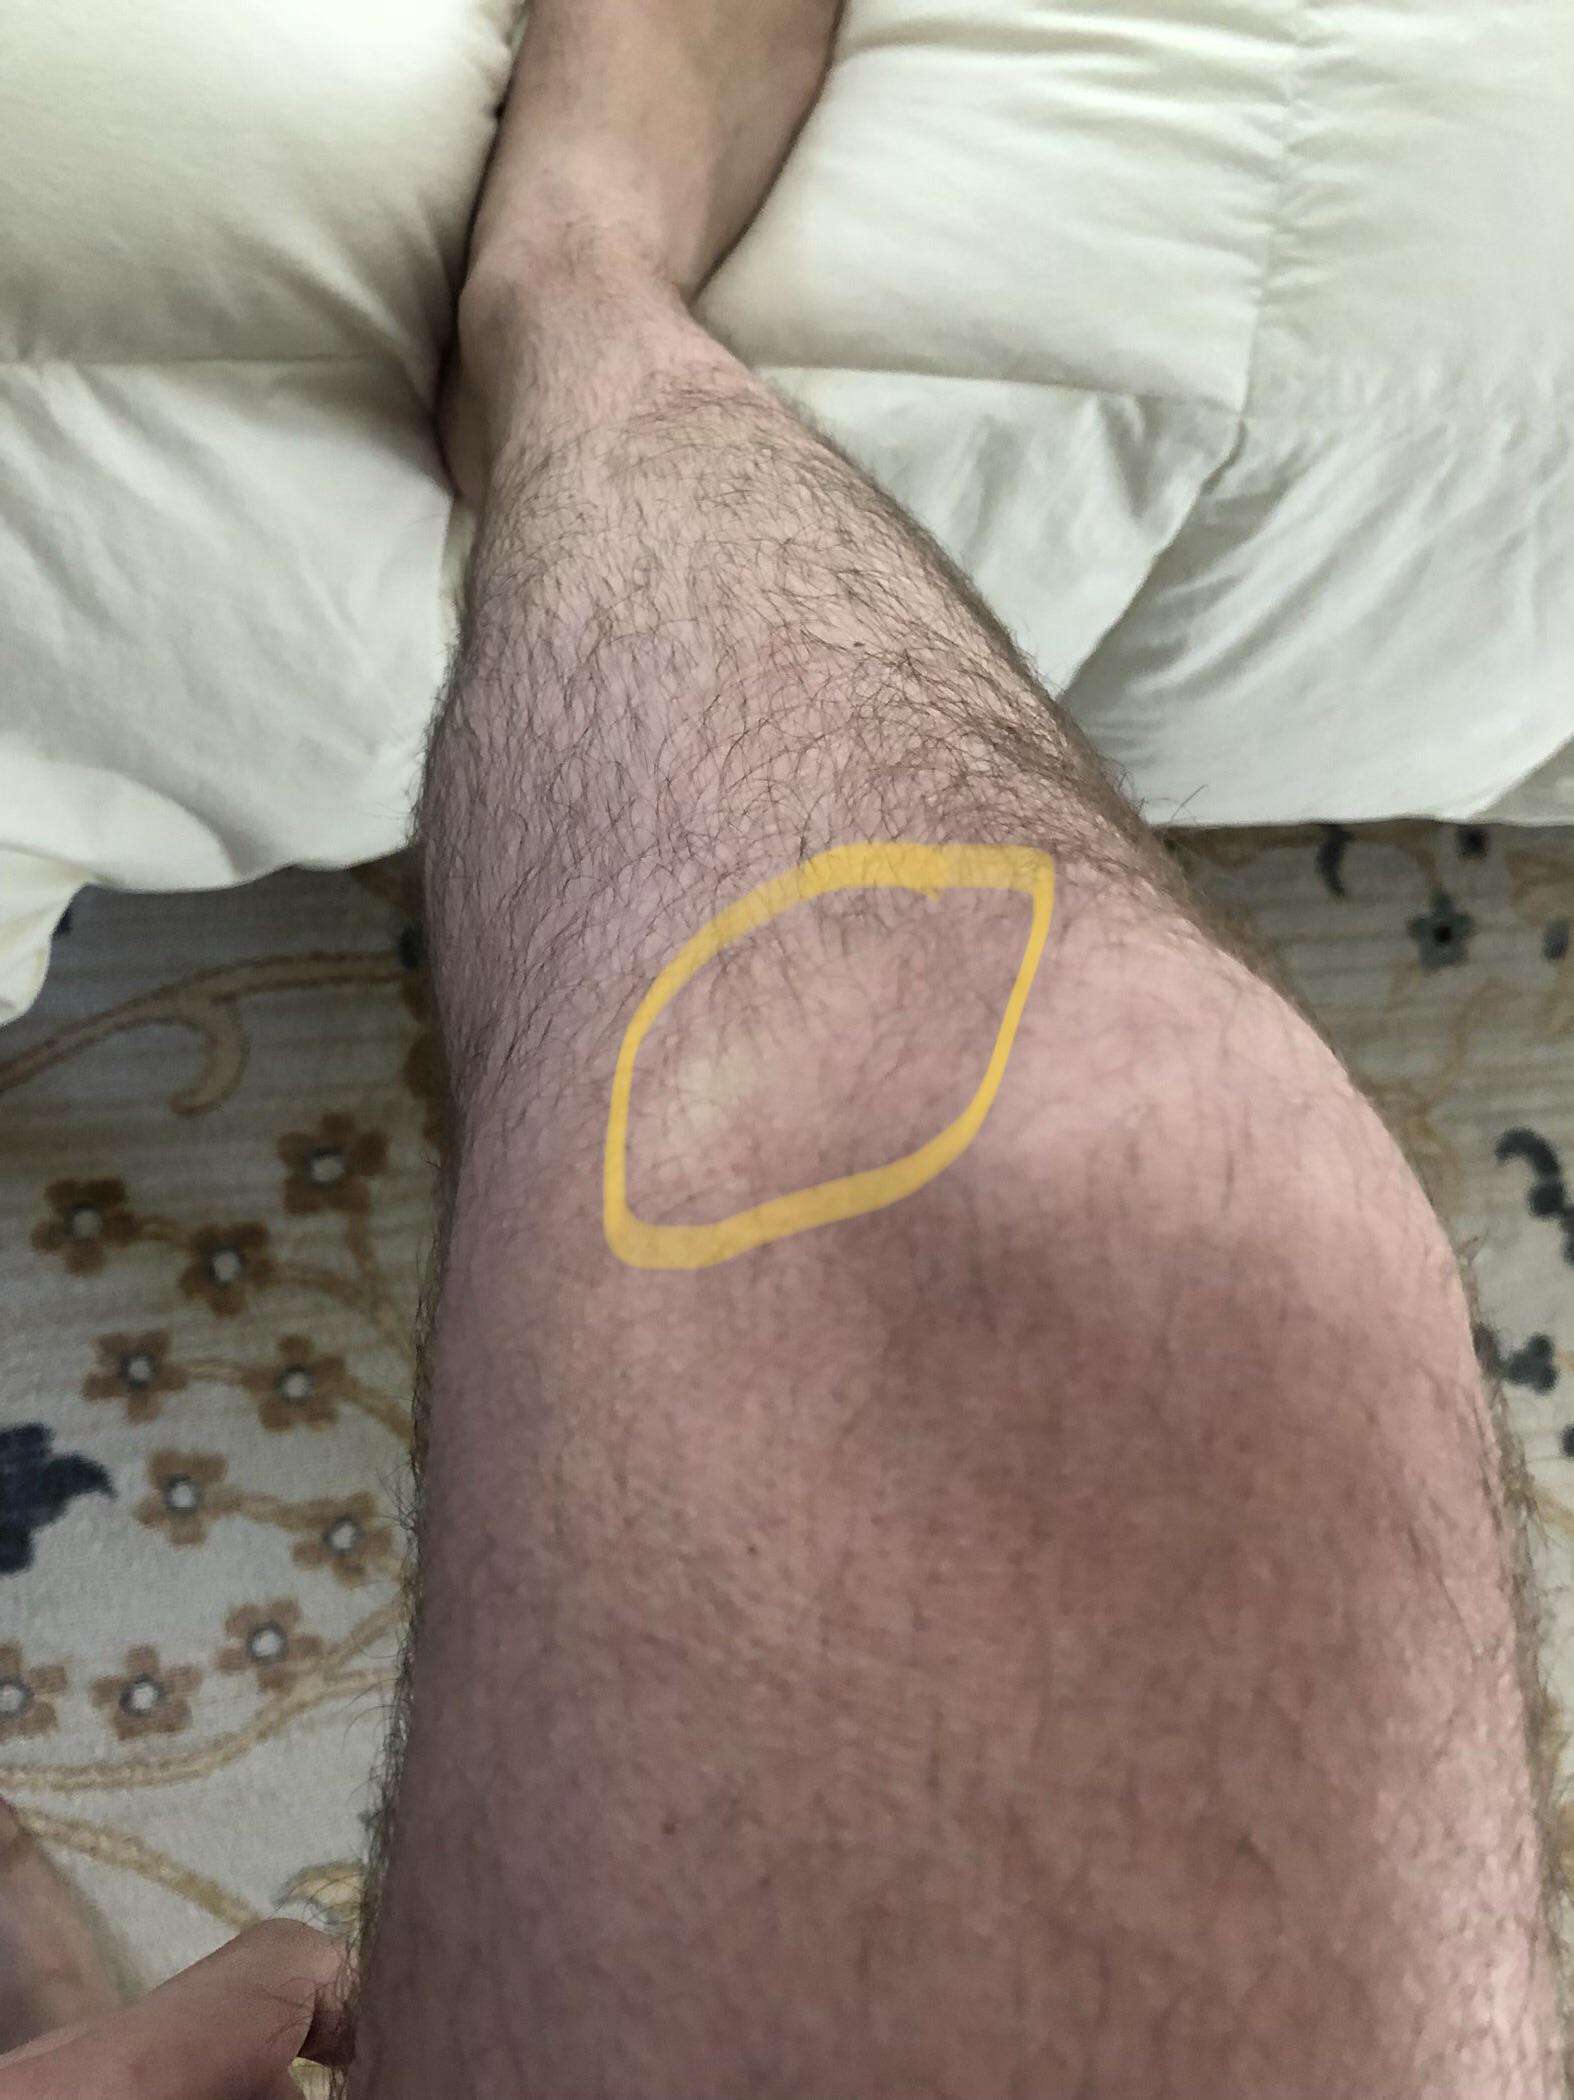 Having a bit of knee pain in the circled area